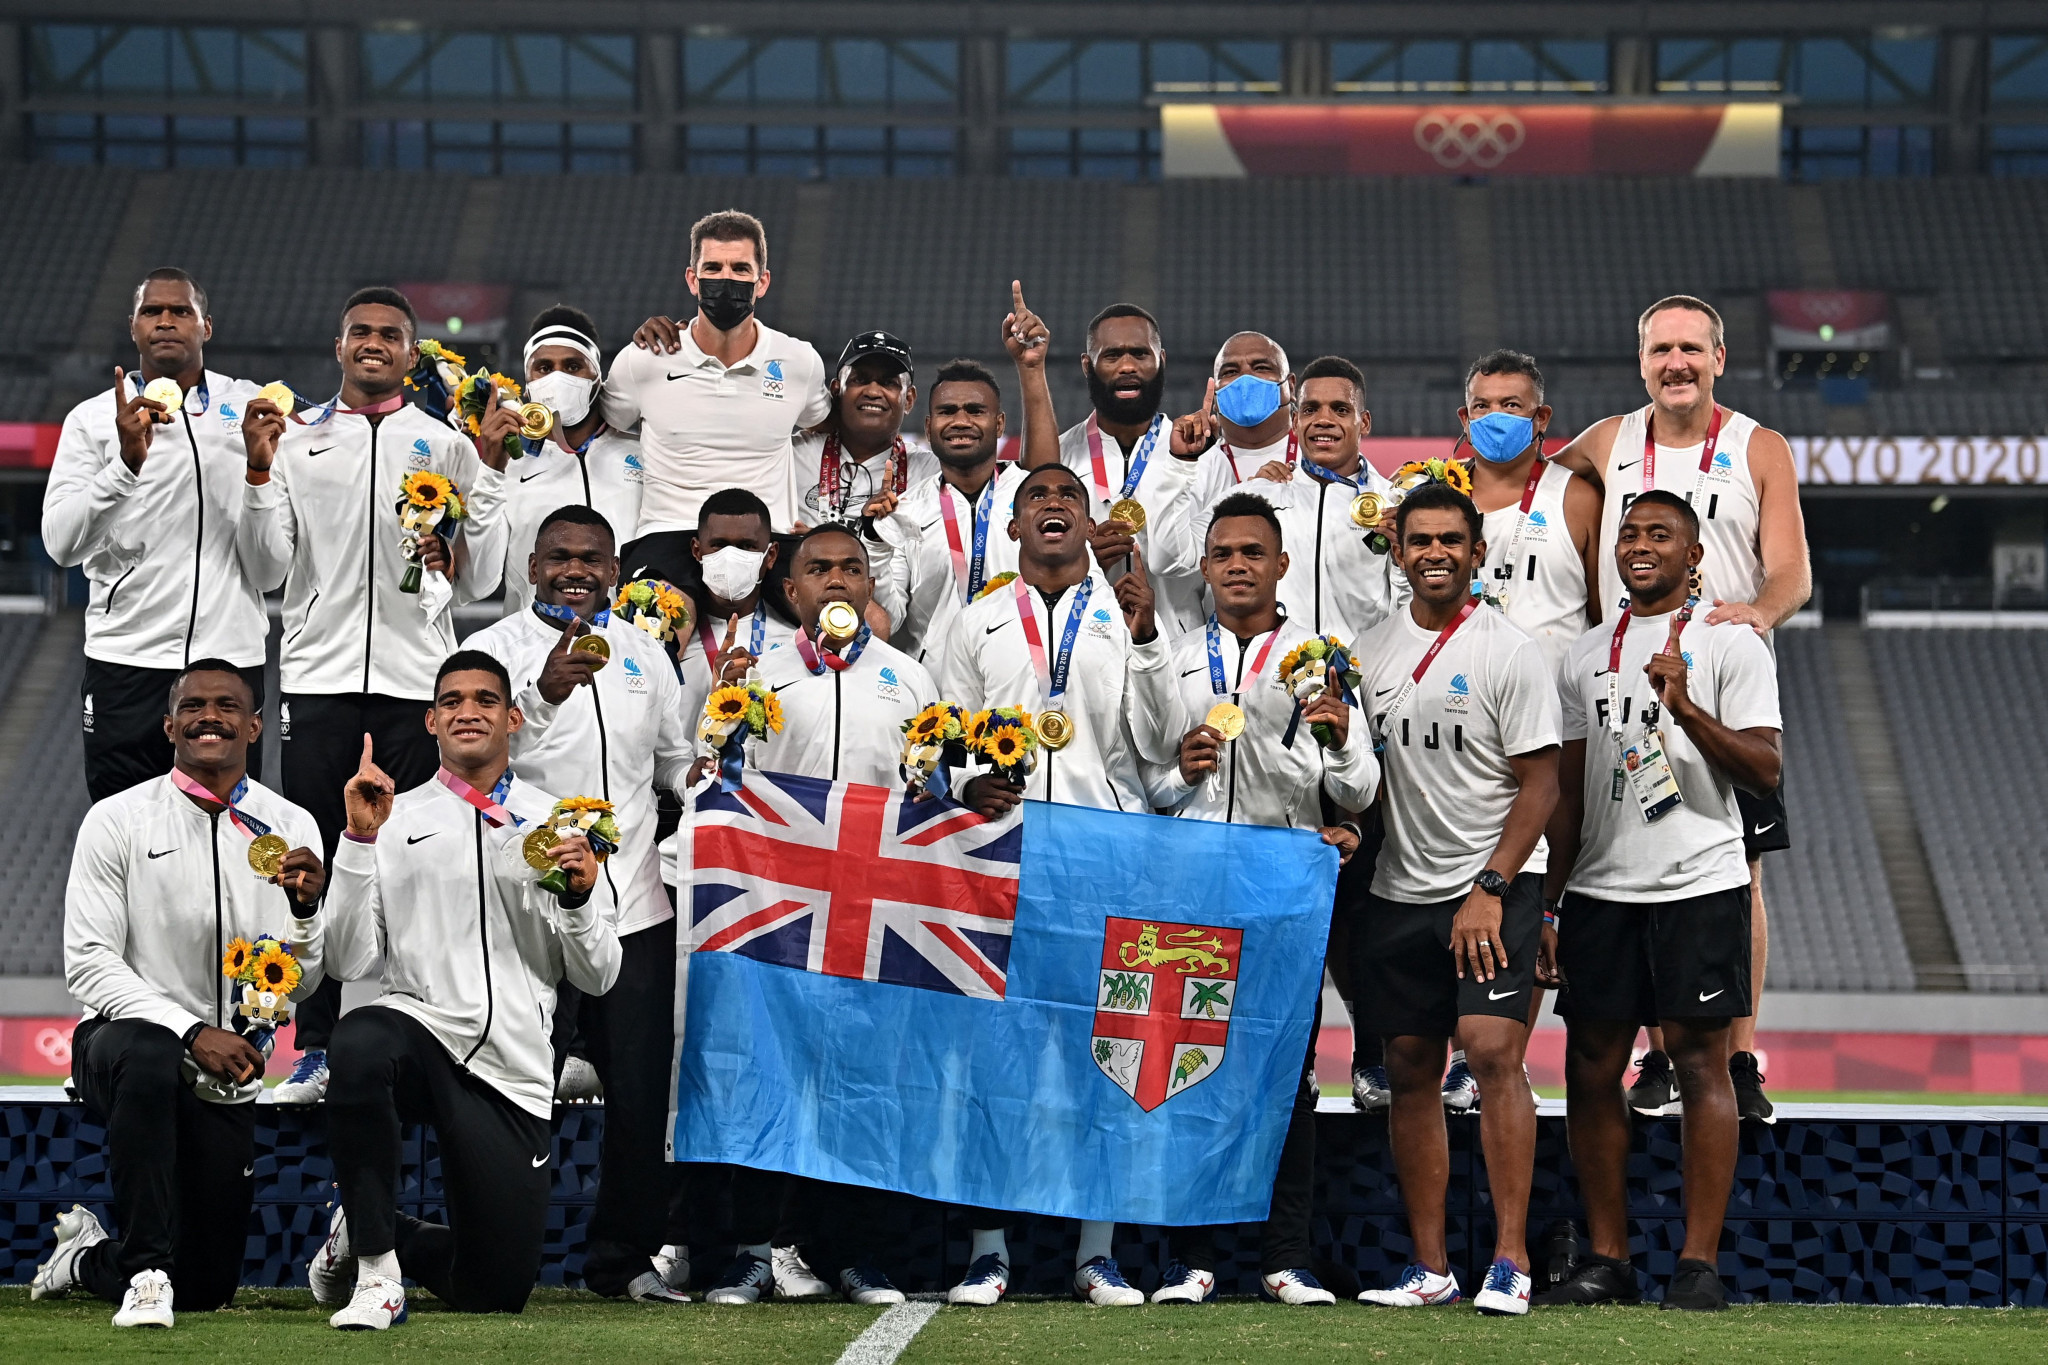 Fiji triumphed in the men's rugby sevens at Tokyo 2020 ©Getty Images